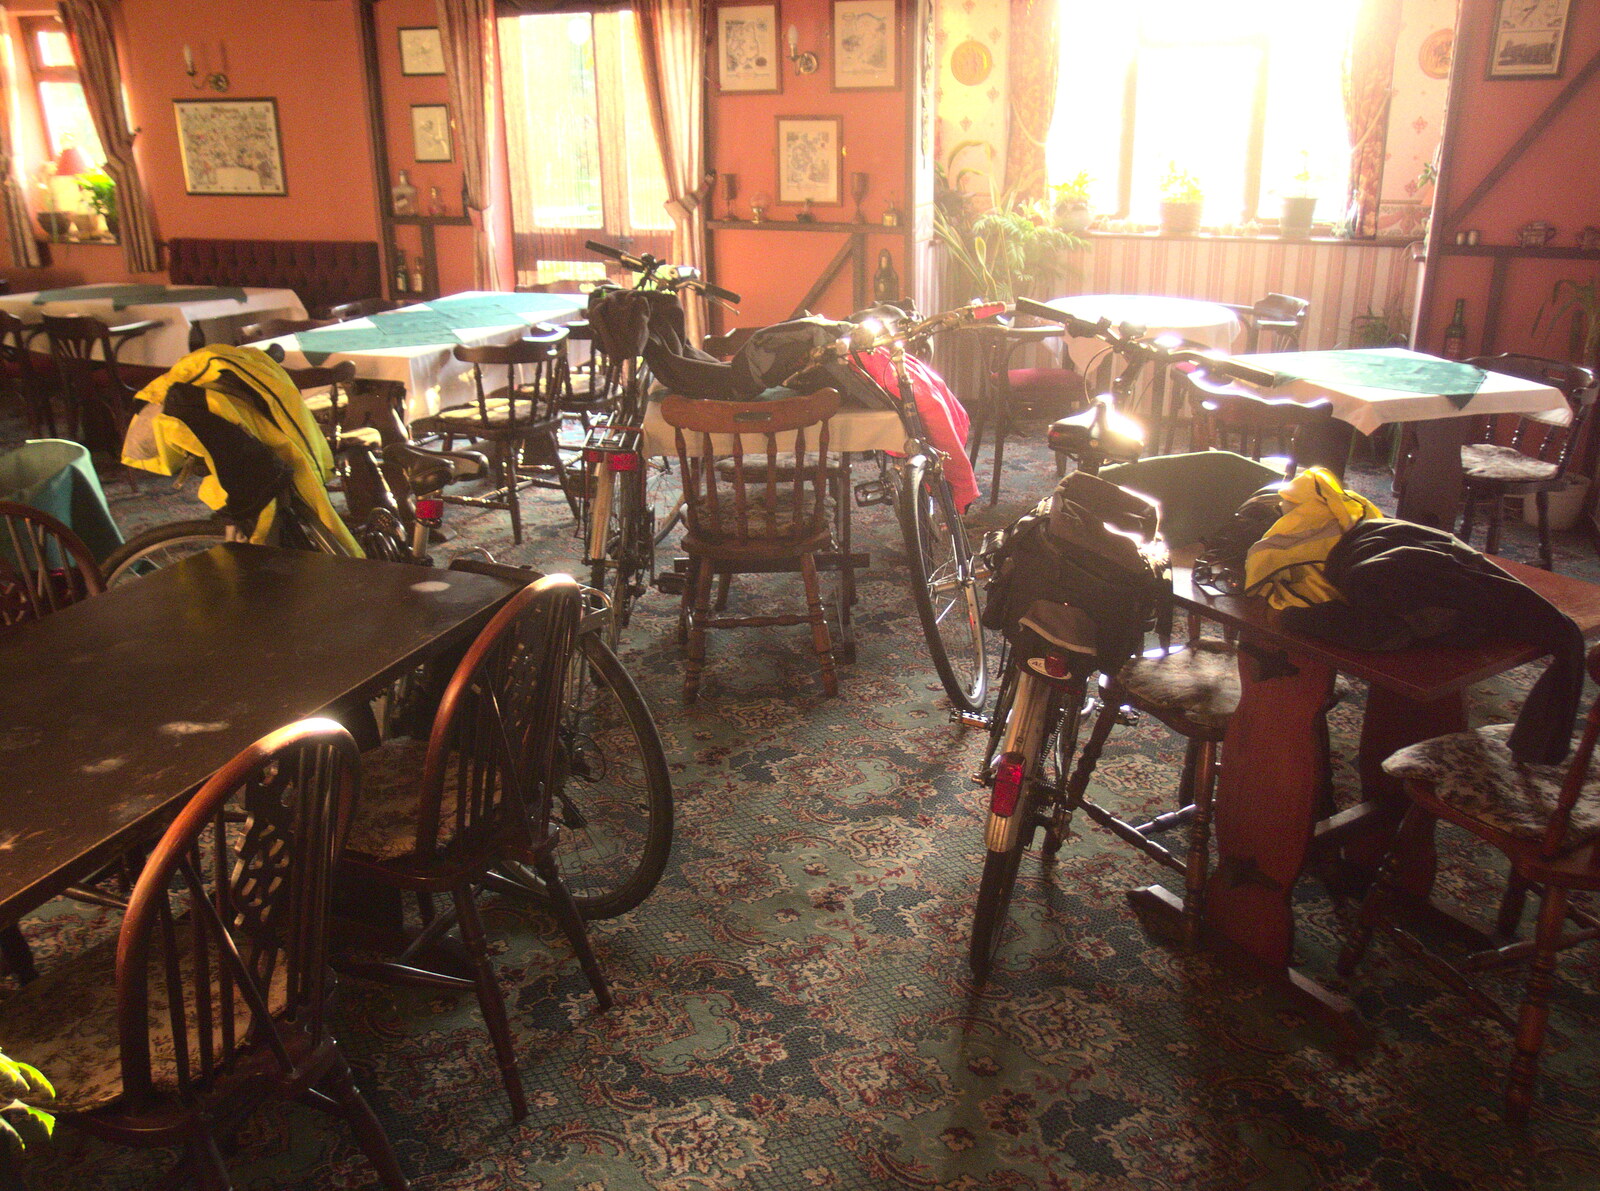 The restaurant has become a bike shed from The BSCC at the Mellis Railway and The Swan, Brome, Suffolk - 8th June 2017